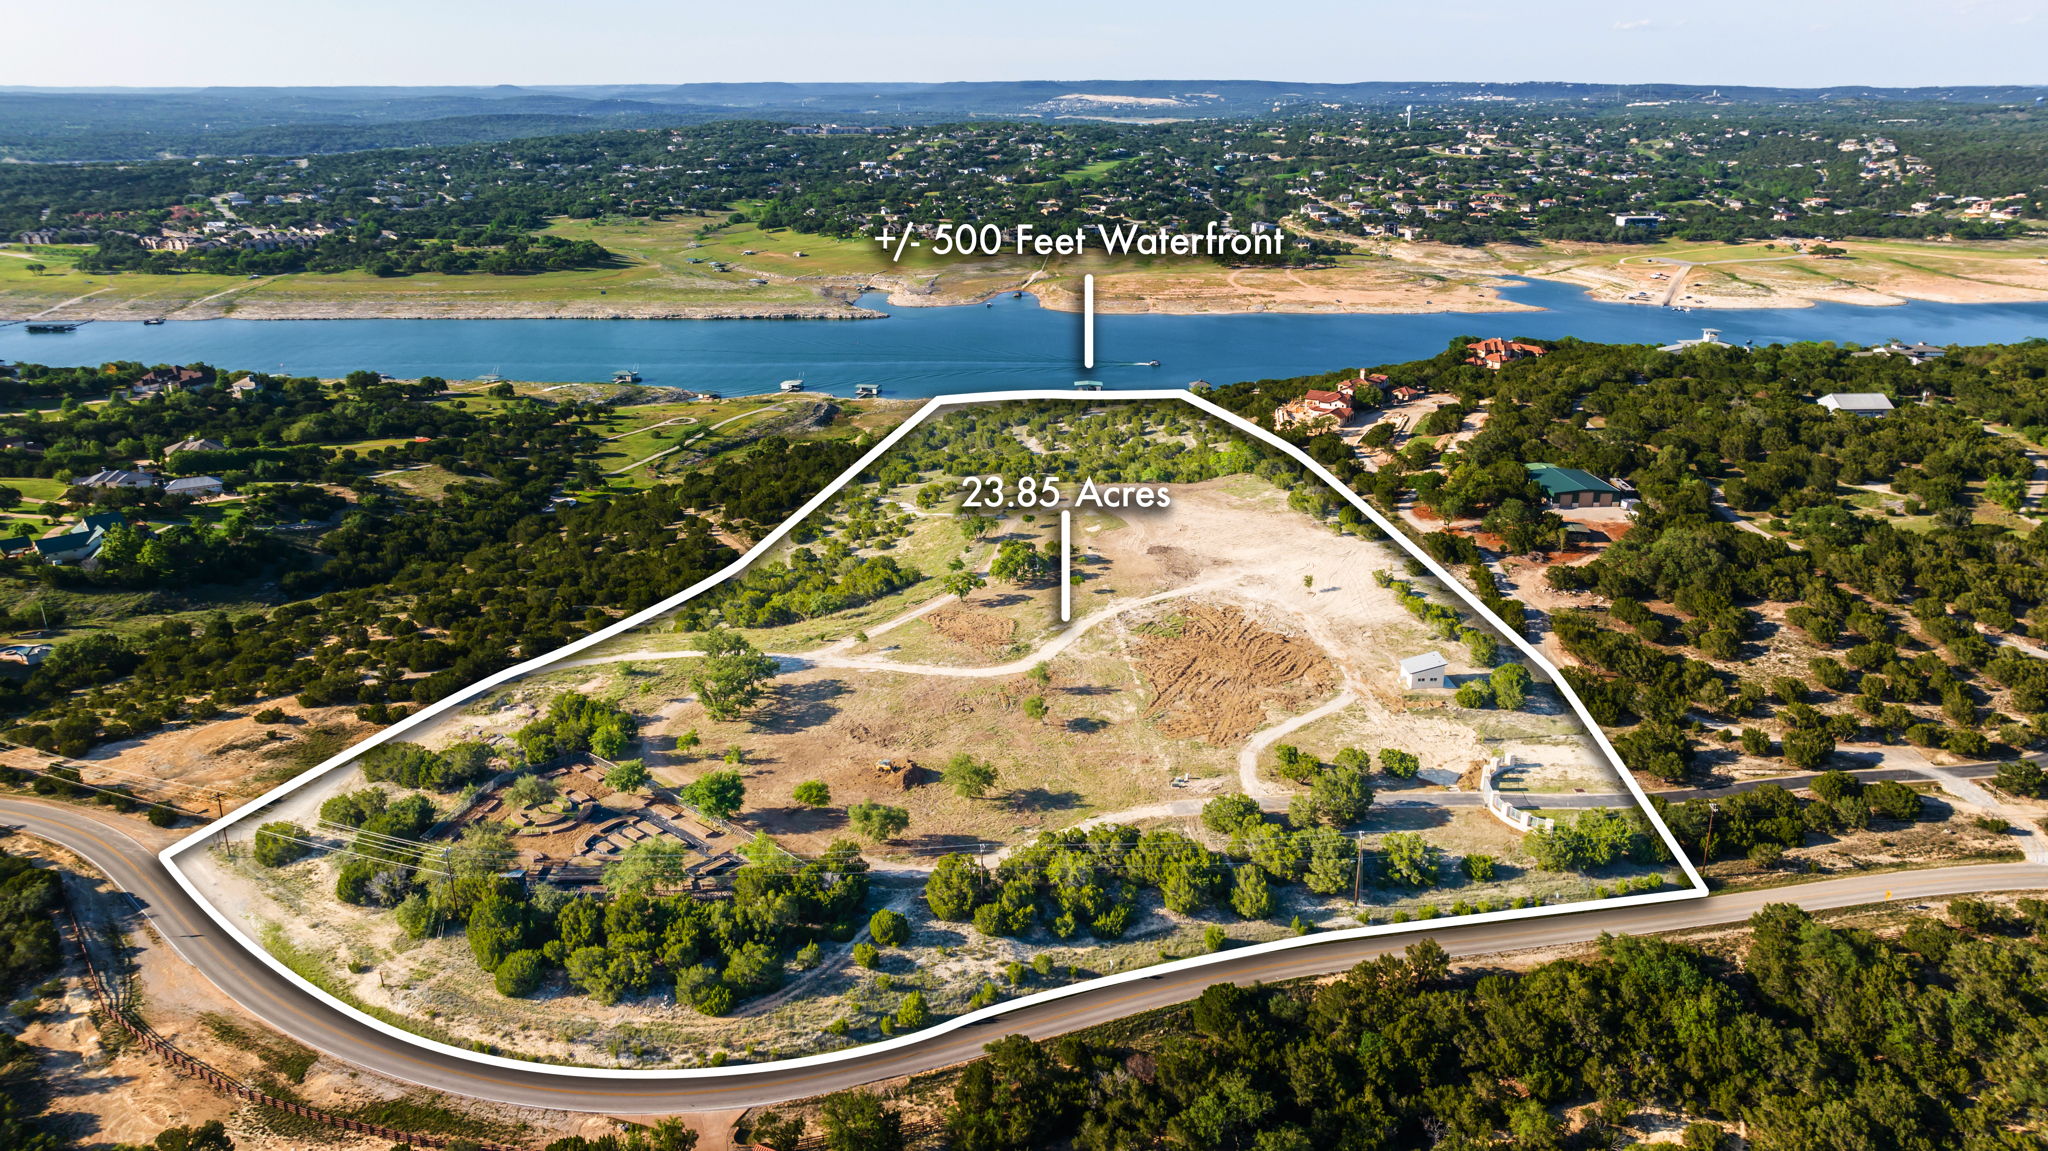 Waterfront & Acreage - The private boat dock is pictured under the arrow. +/- 500 feet of waterfront.